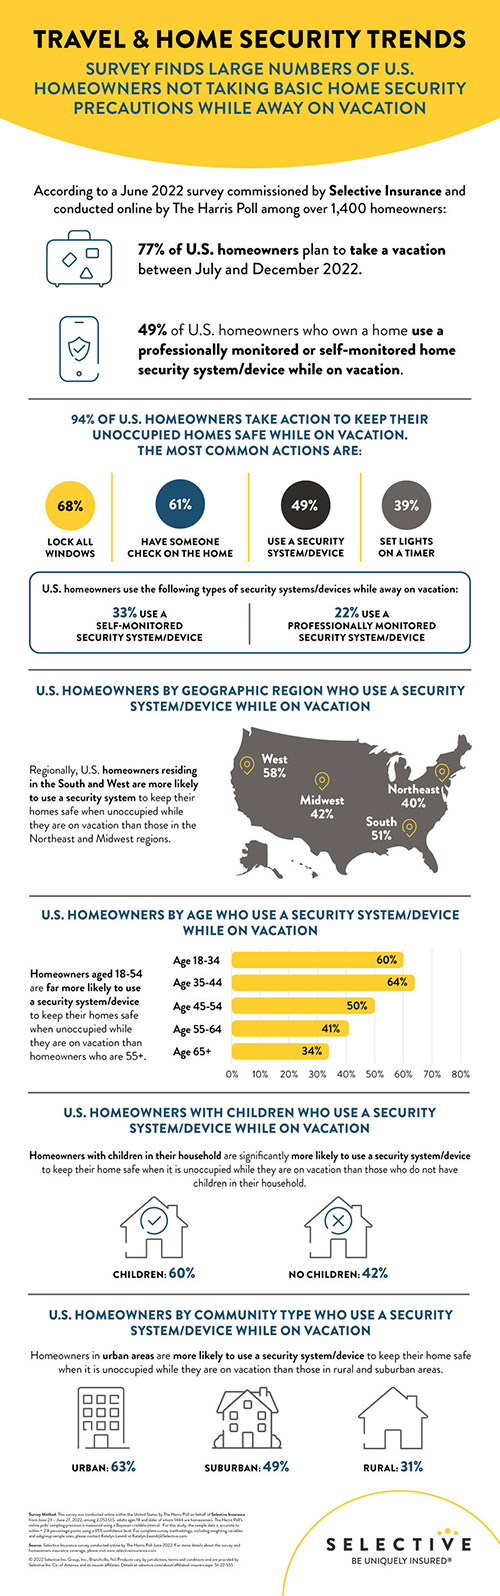 eventy-seven percent of U.S. homeowners plan to take at least one vacation between July and December 2022, according to a new study commissioned by Selective Insurance, with 44% planning to travel for a week or longer. While 59% of U.S. homeowners have a home security system or device, less than half (49%) use one to protect their unoccupied home when they are on vacation. Locking all their windows (68%) is the most common home security measure vacationing U.S. homeowners use to protect their vacant homes.